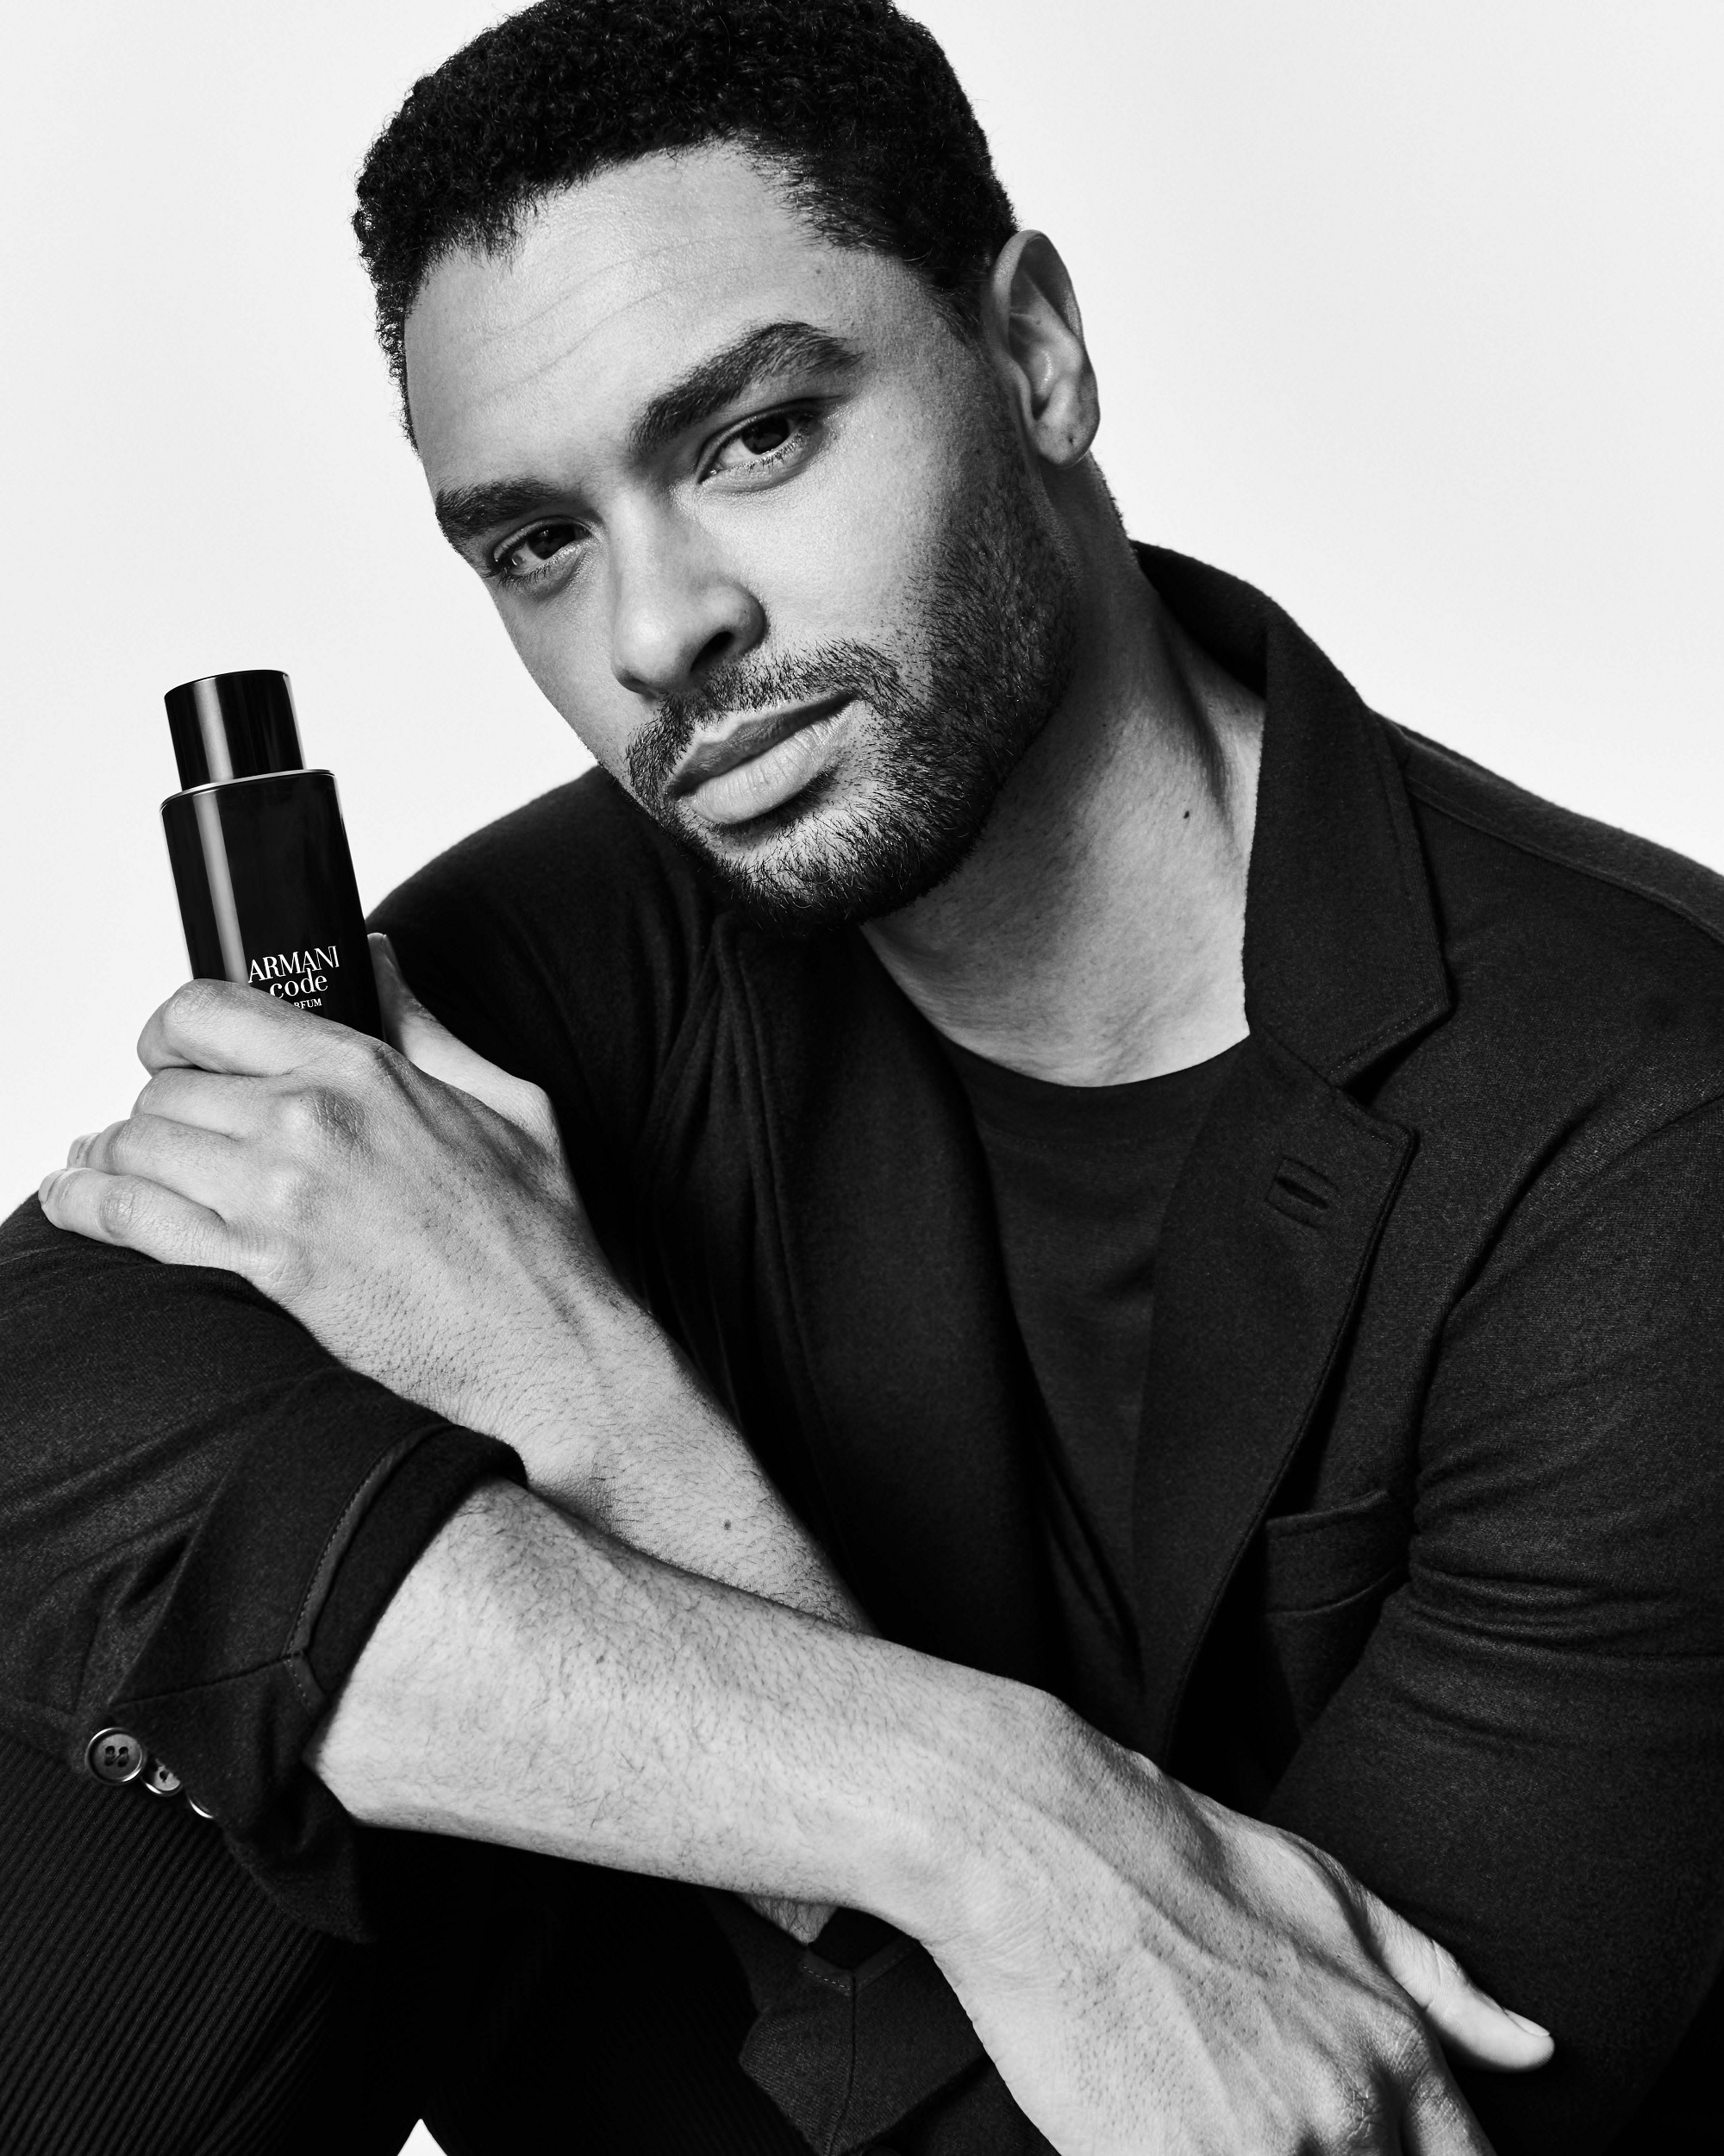 Armani Code Parfum: What's the Point? ~ Fragrance Reviews